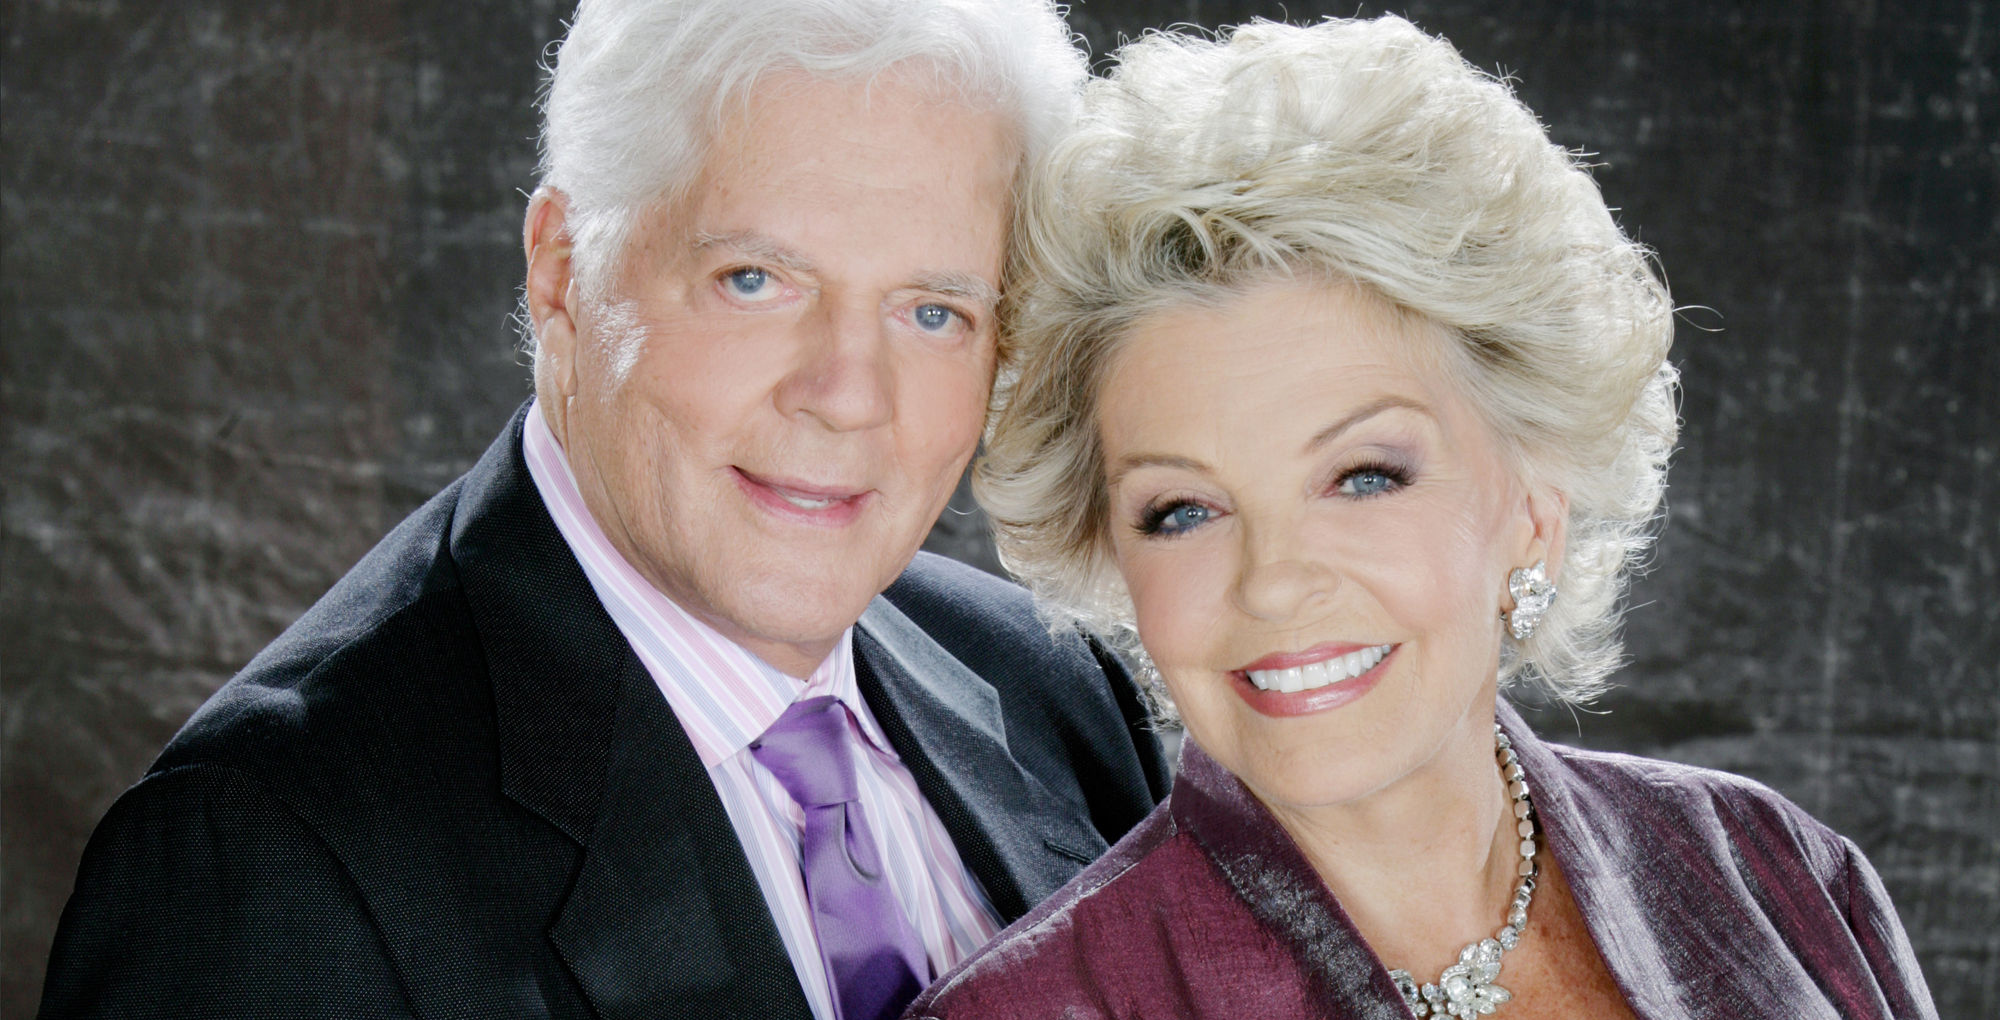 bill hayes and susan seaforth hayes from days of our lives.